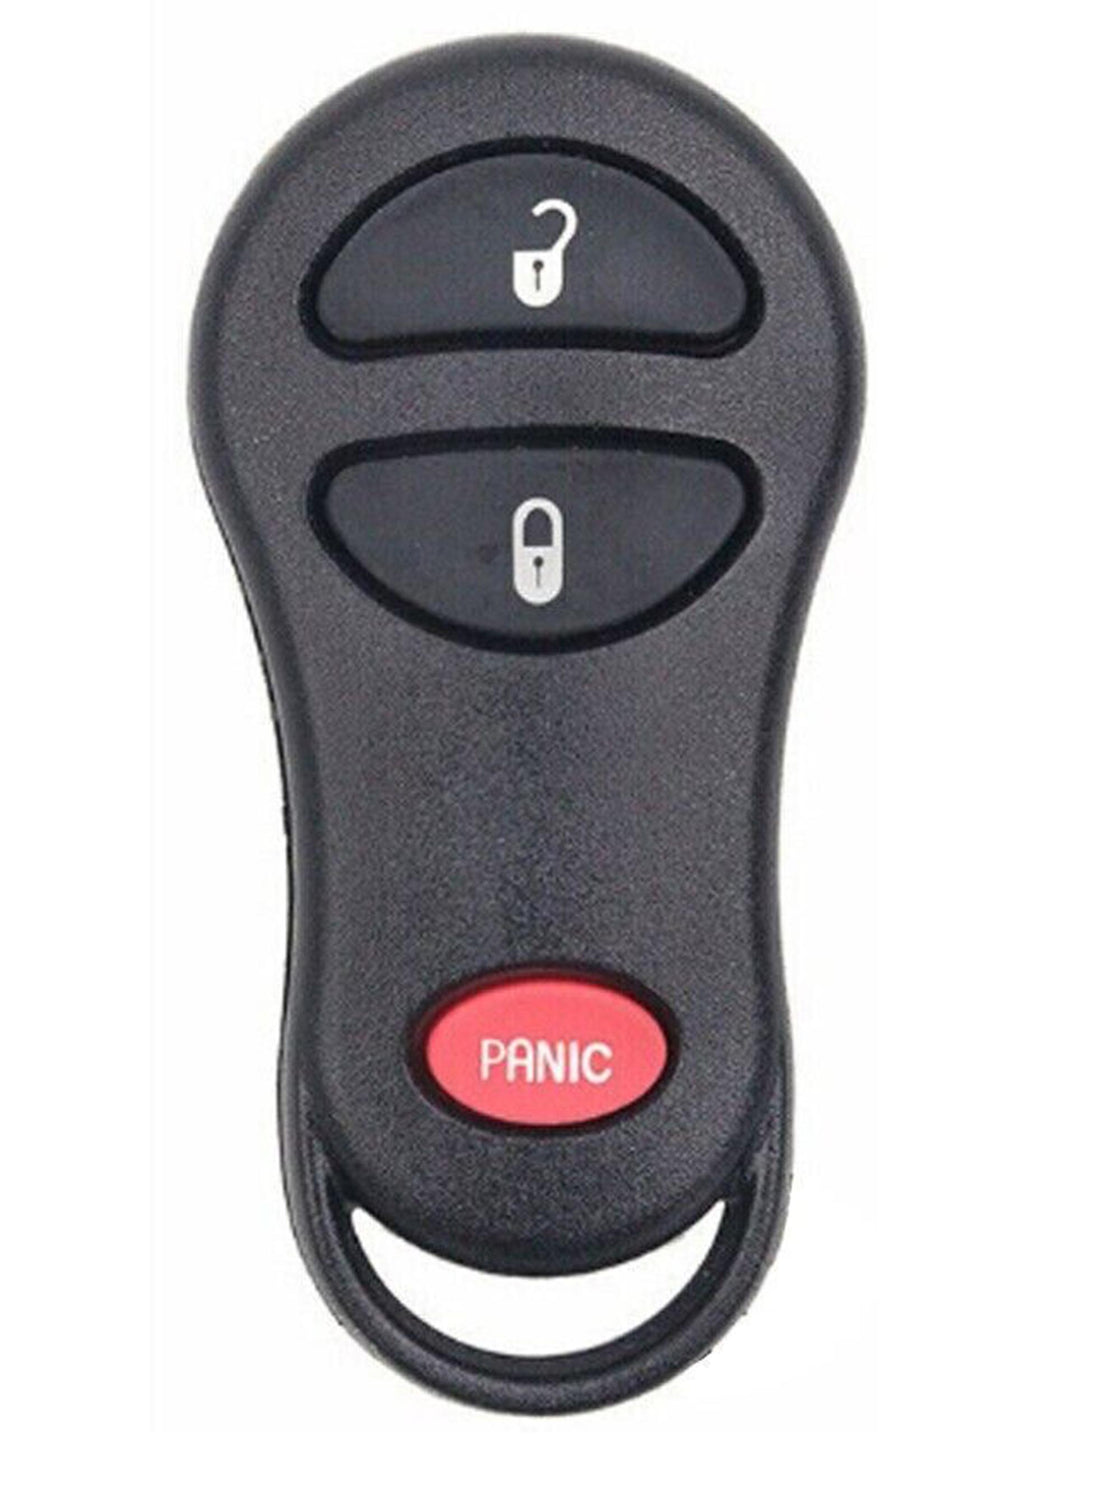 2000 Plymouth Voyager Key fob Remote SHELL / CASE - (No Electronics or Chip Inside)